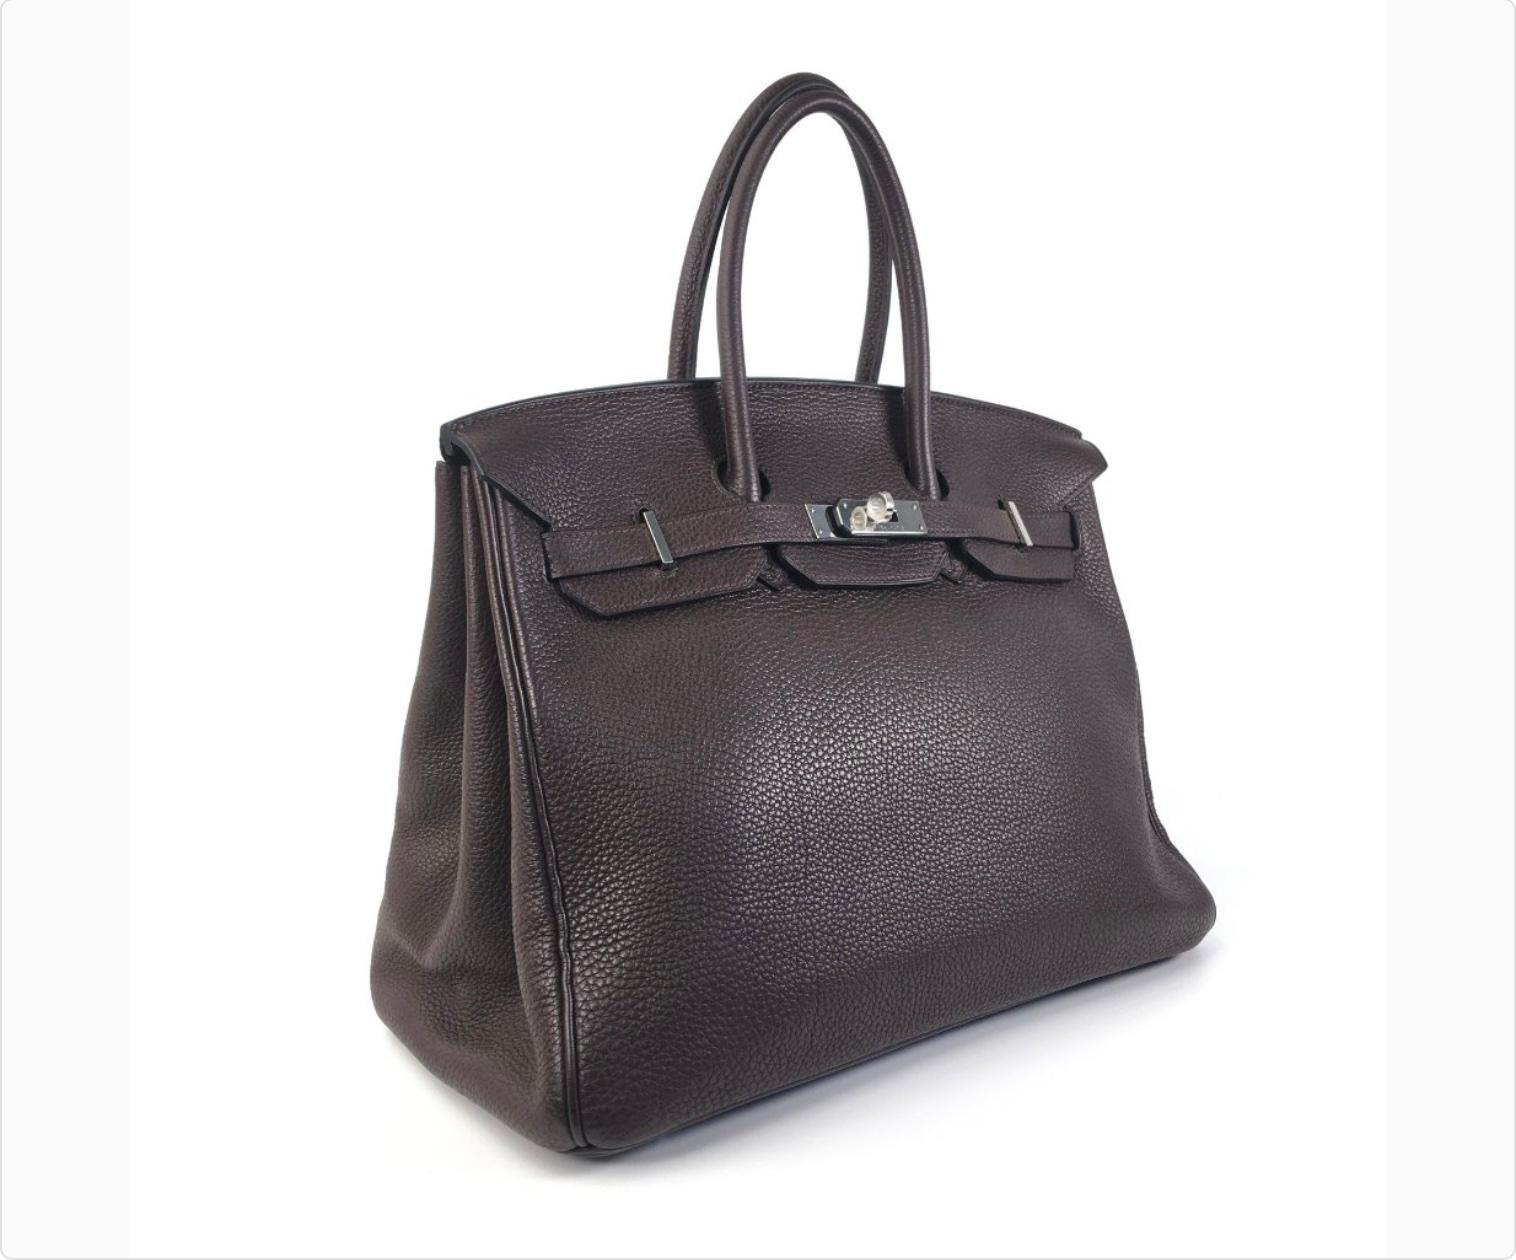 Hermes Birkin 35
Brand / Designer
Hermes
Color
Chocolate Brown
Size
35
Material
Clemence
Hardware
Palladium
Condition
8/10 (Average Condition)
Includes
Dustbag, Lock & Key, Clochette
Serial / Barcode
M Square Stamp - 2009